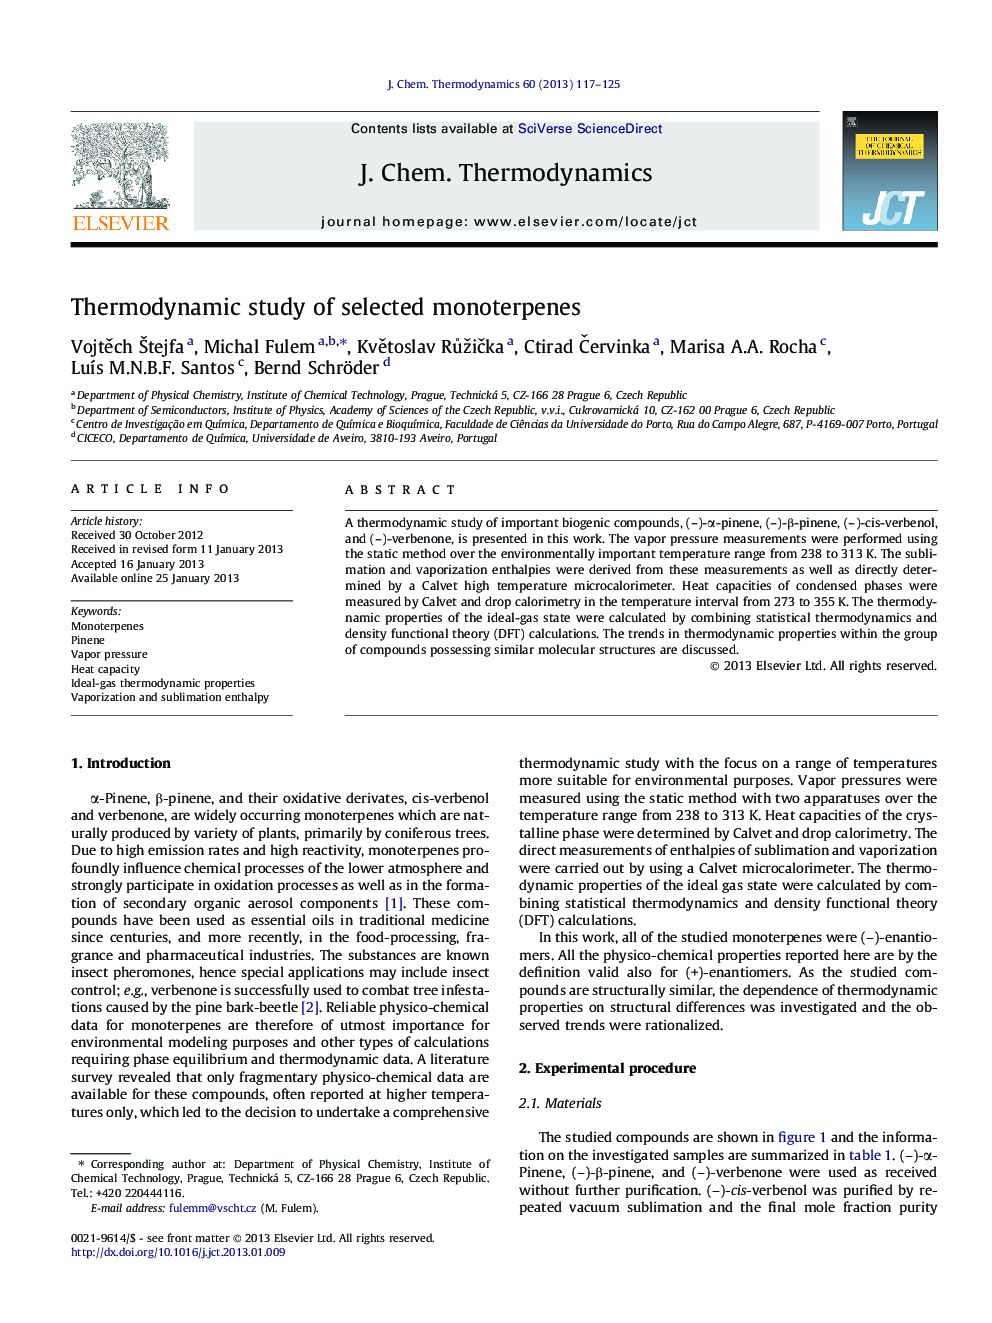 Thermodynamic study of selected monoterpenes